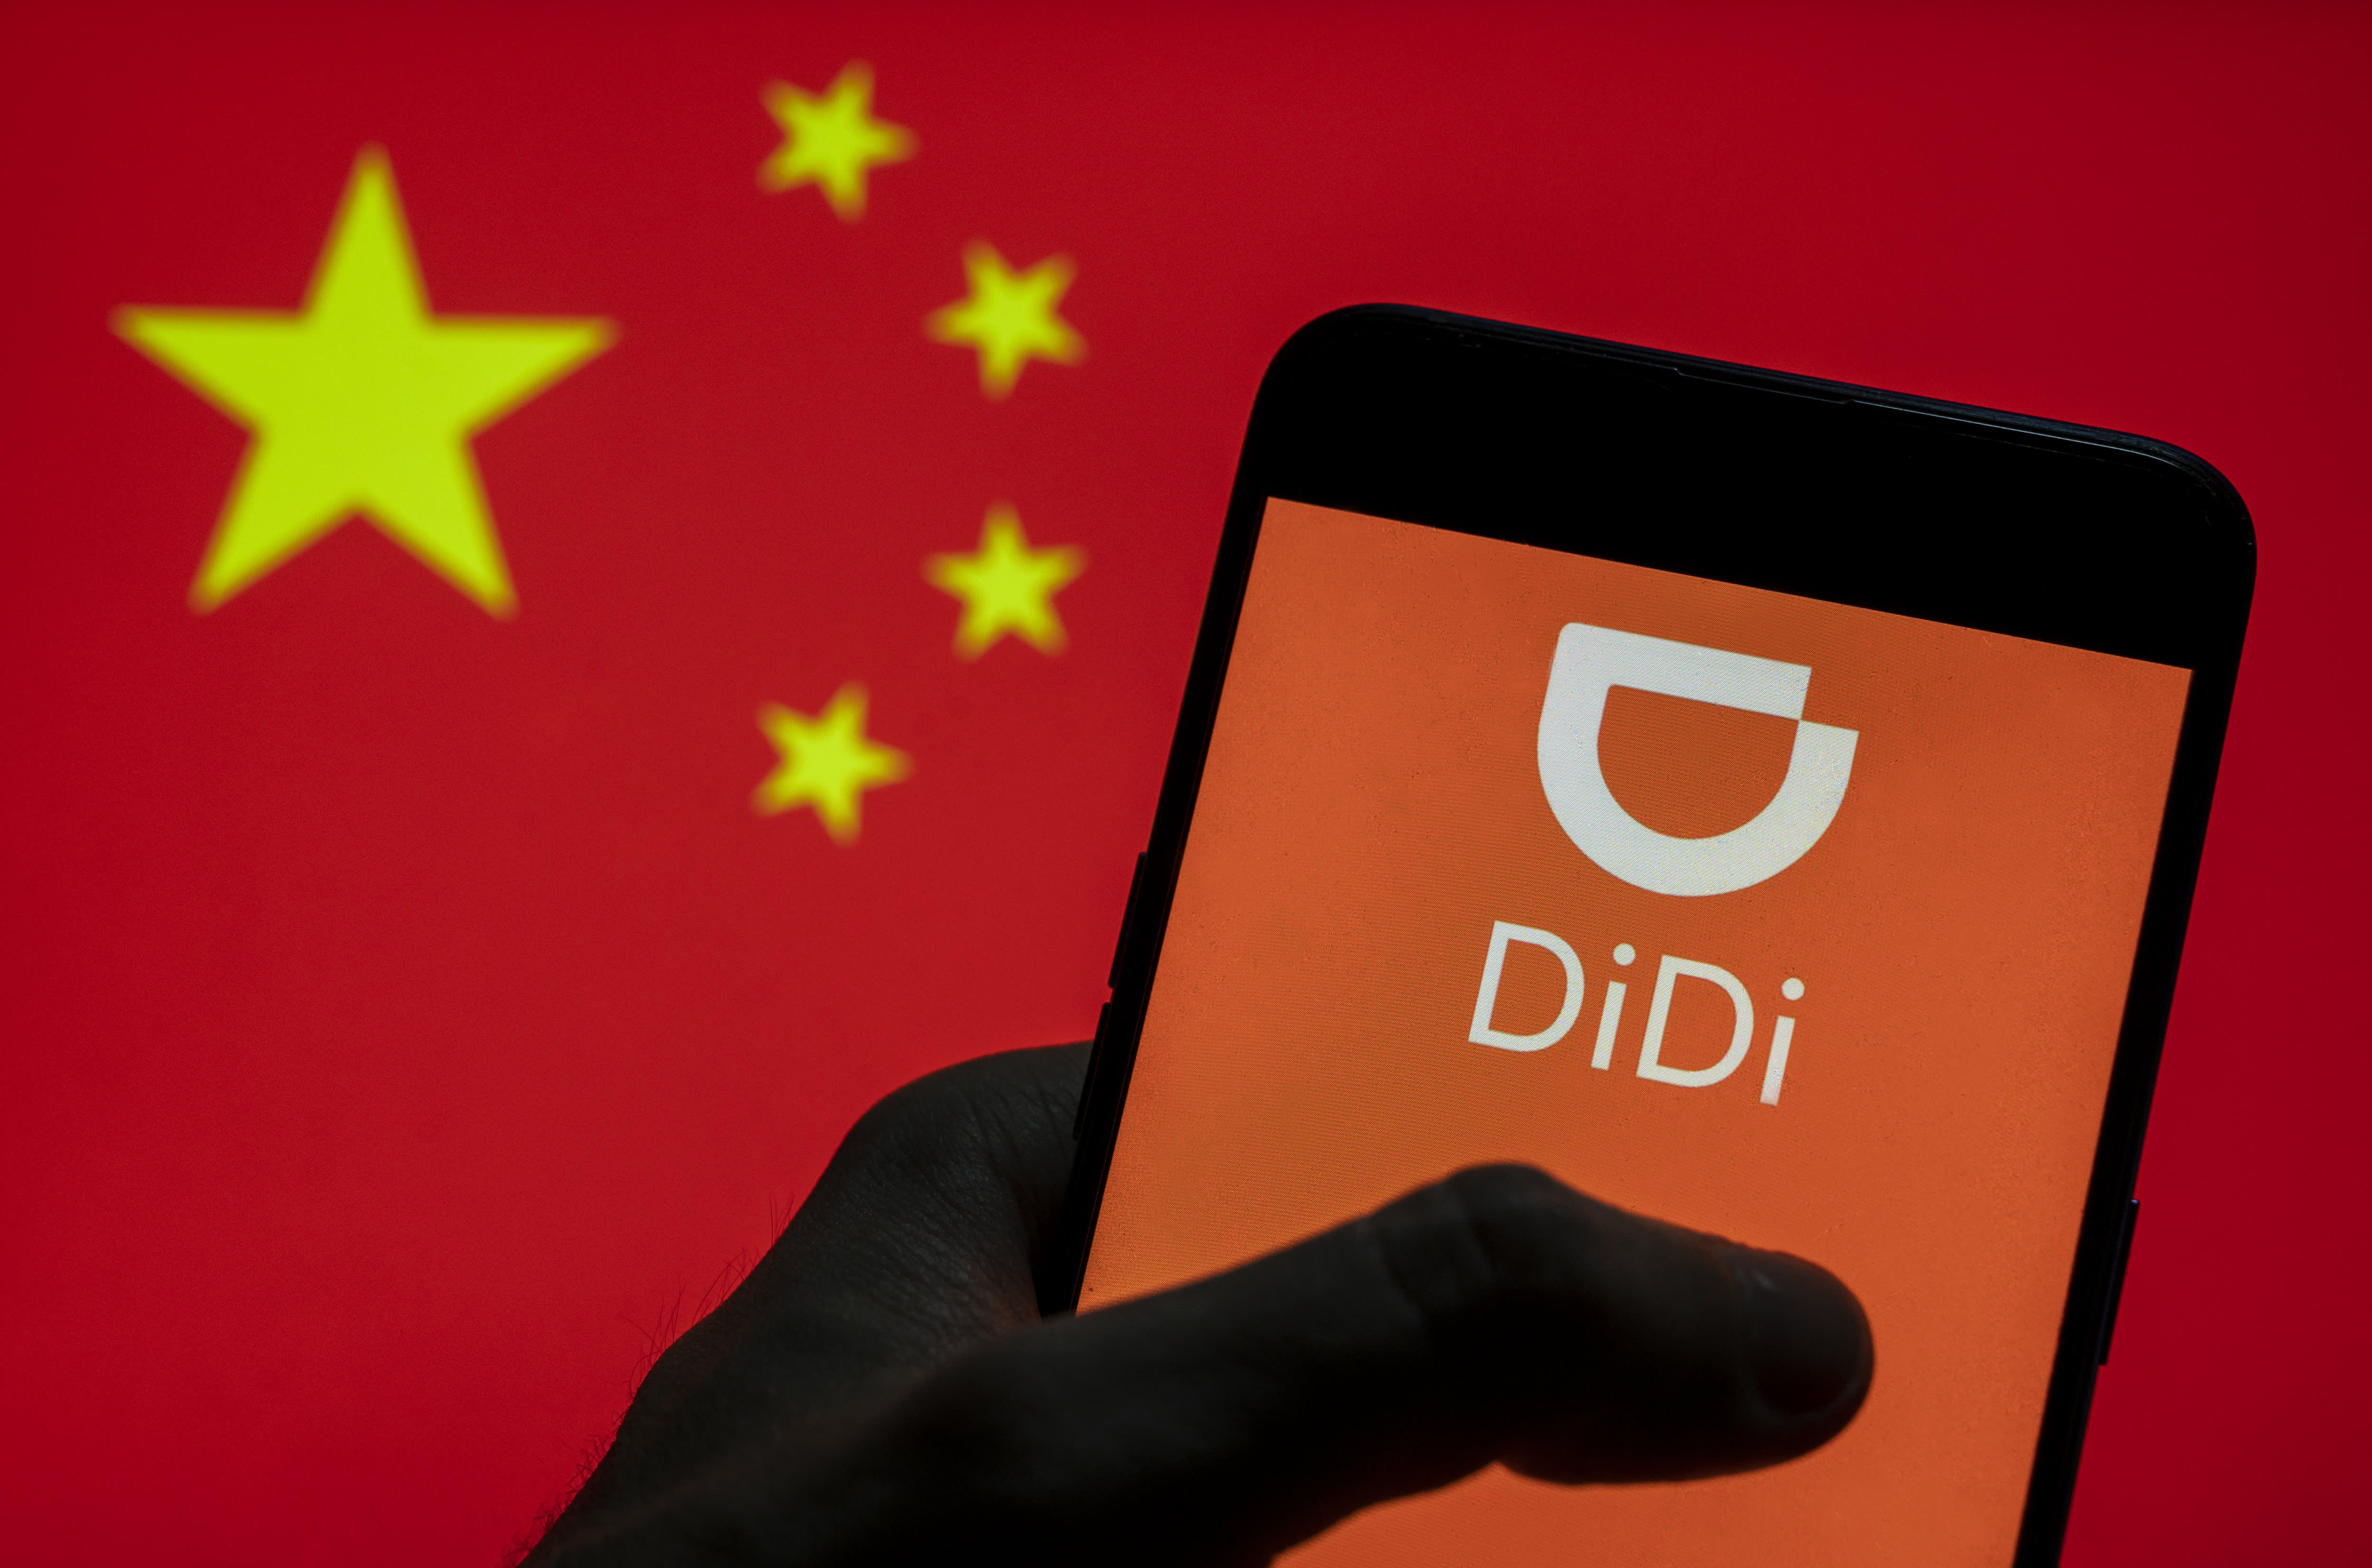 China steps up supervision of overseas-listed firms after Didi IPO drama